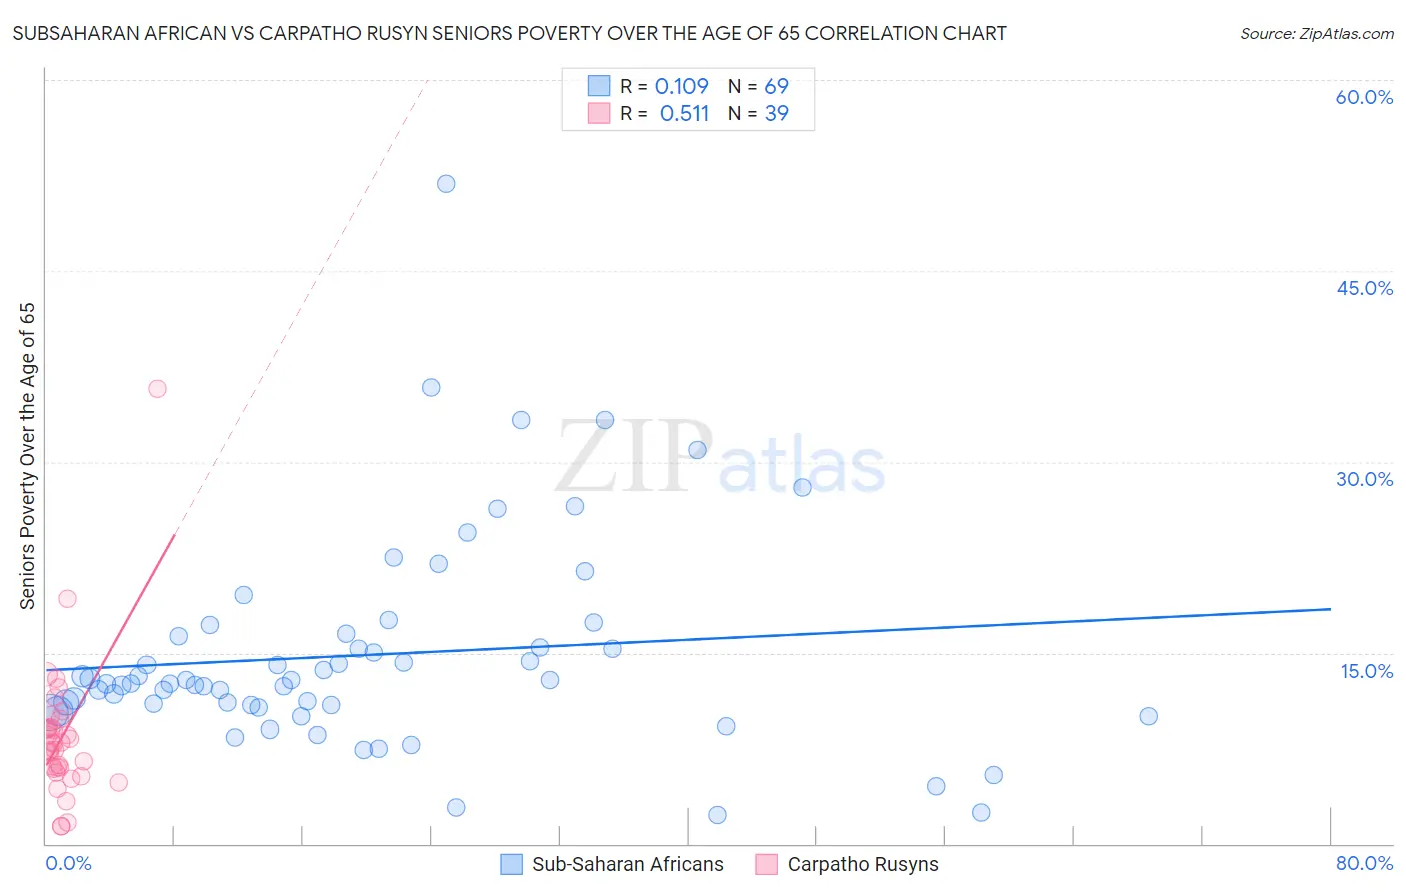 Subsaharan African vs Carpatho Rusyn Seniors Poverty Over the Age of 65